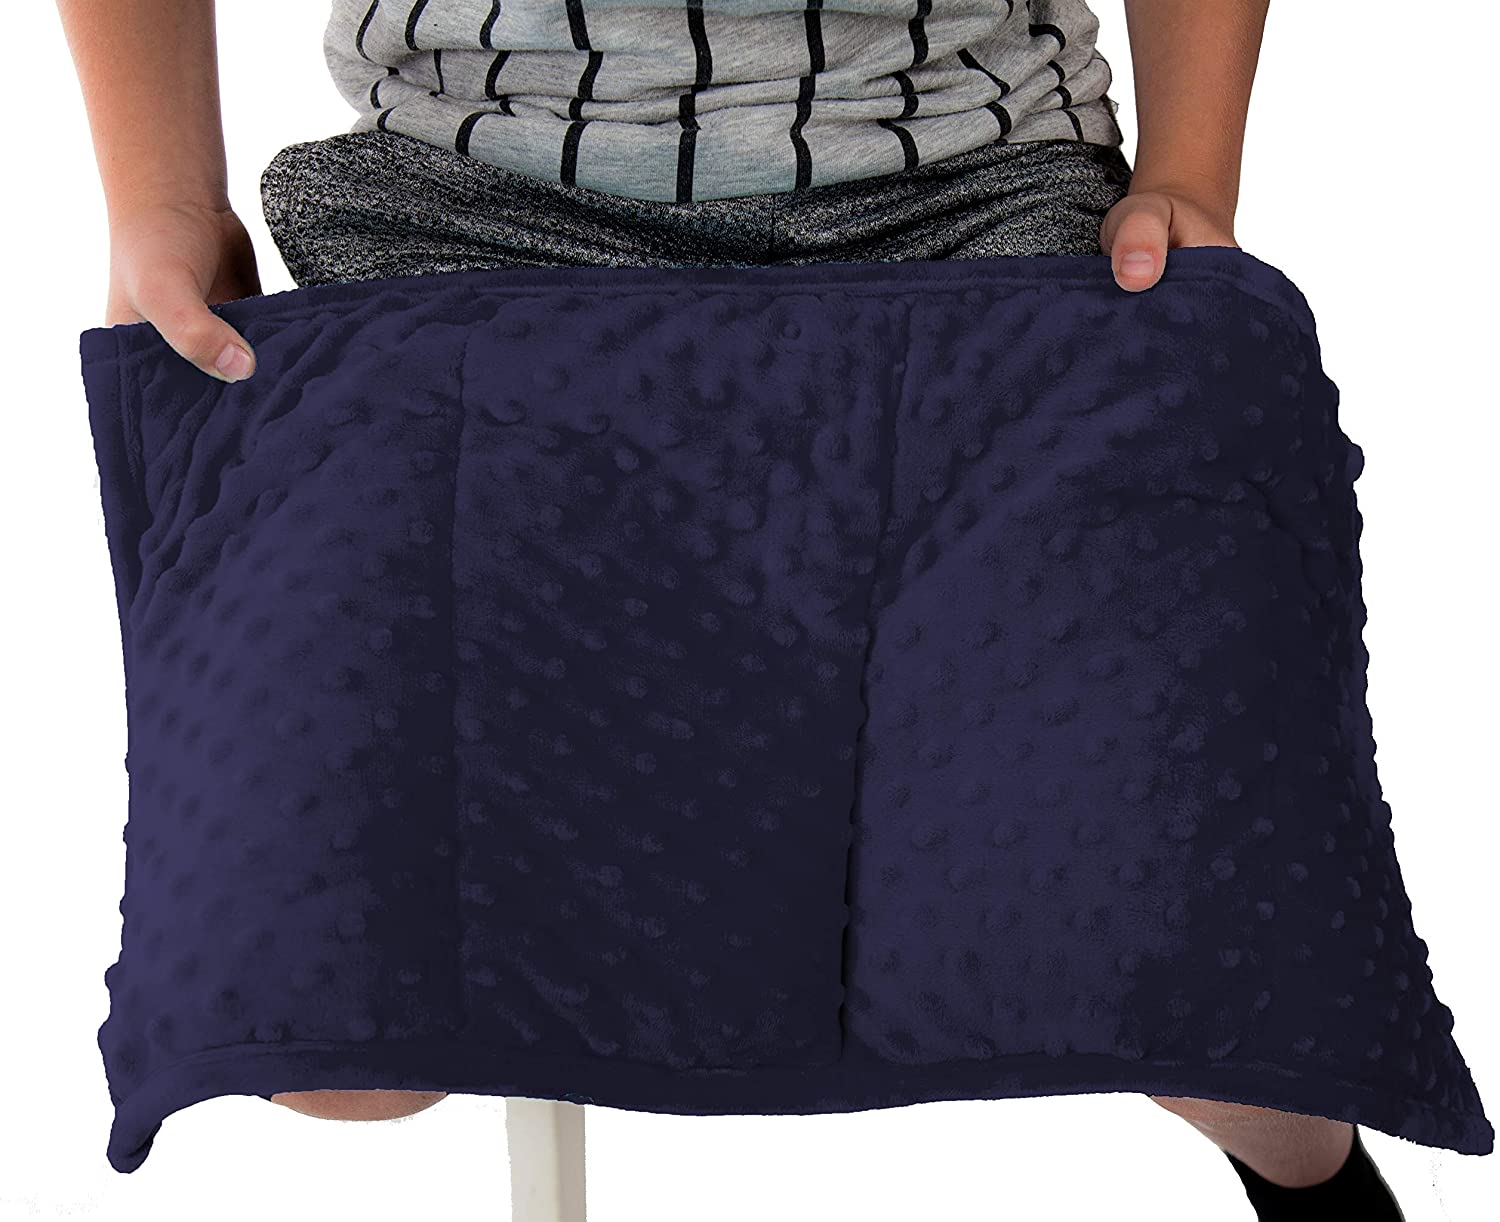 Busy Blanket Sensory Weighted Lap Pad For Kids And Adults, 3 lbs / 1 kg